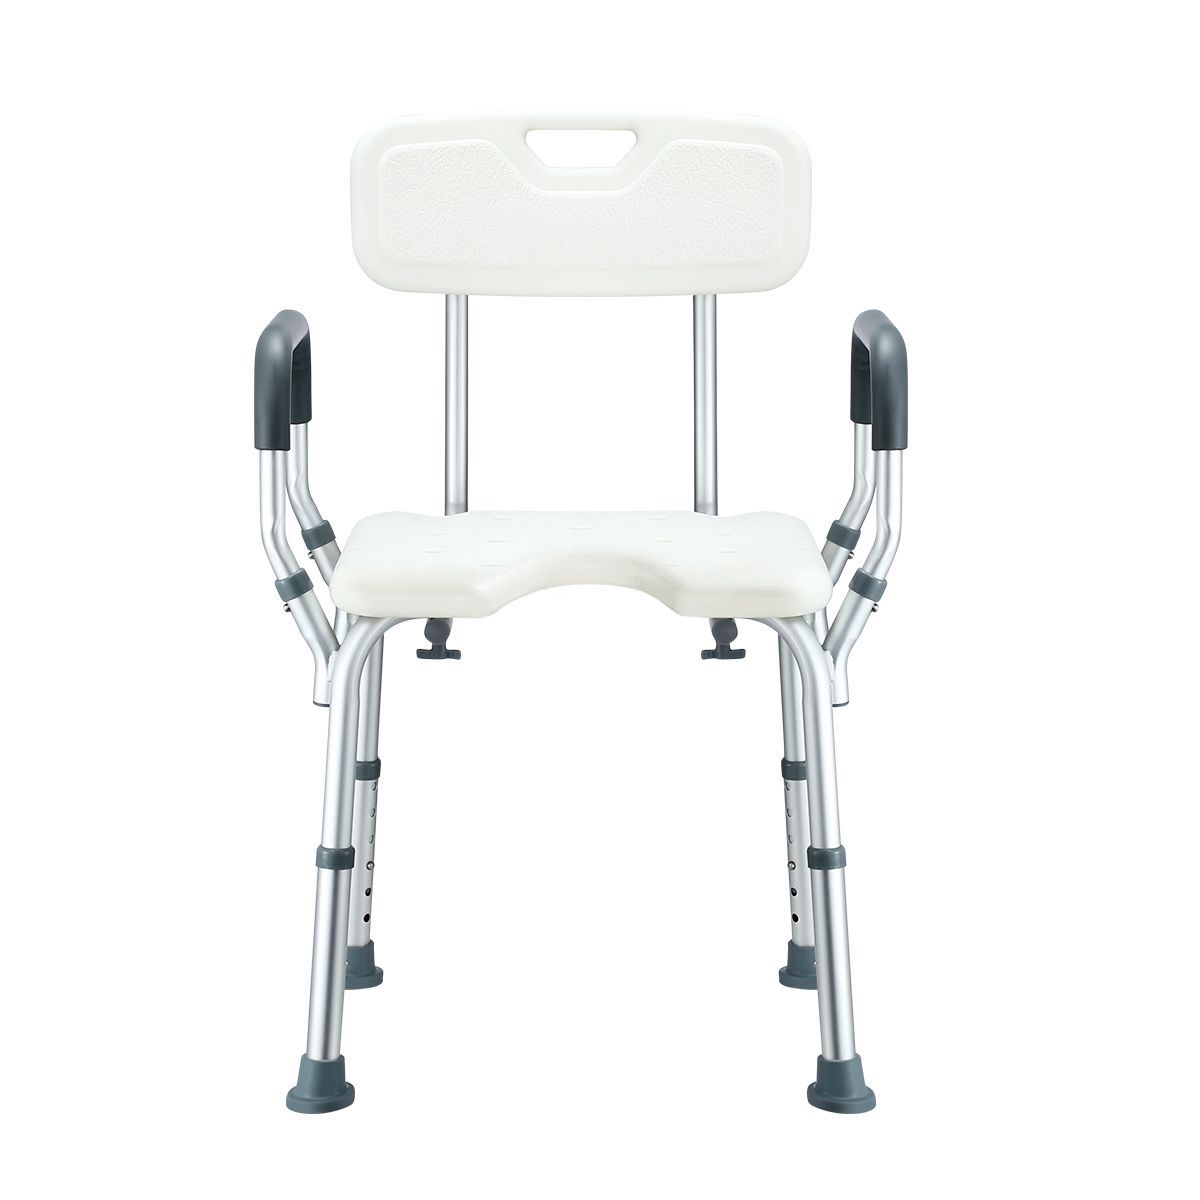 Medical Shower Chair Bathtub Bath Seat Stool with Back and Armrests